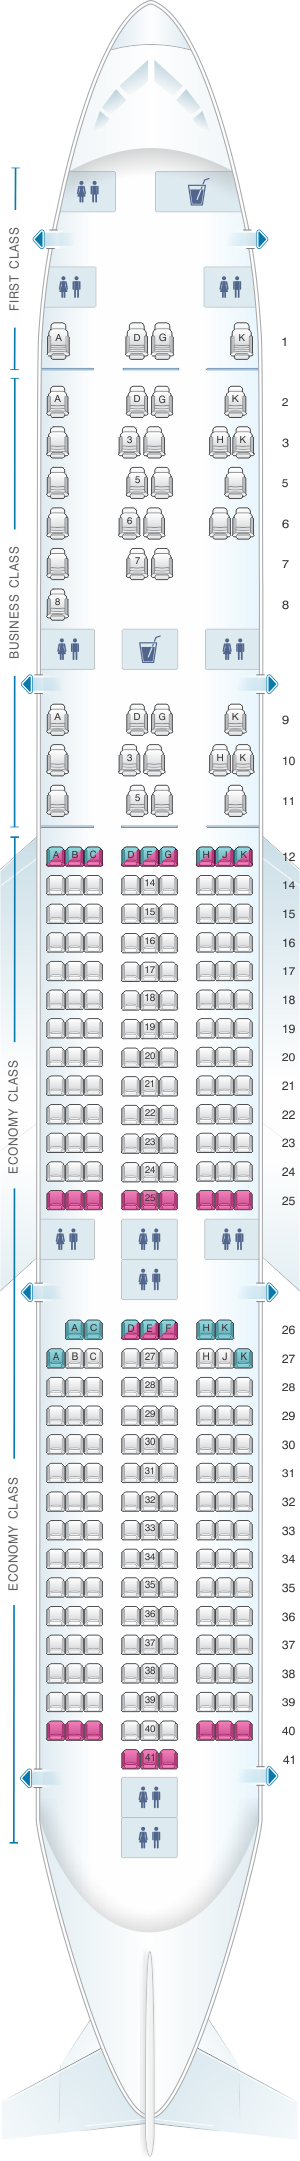 Seat Map Malaysia Airlines Airbus A350 900 | SeatMaestro